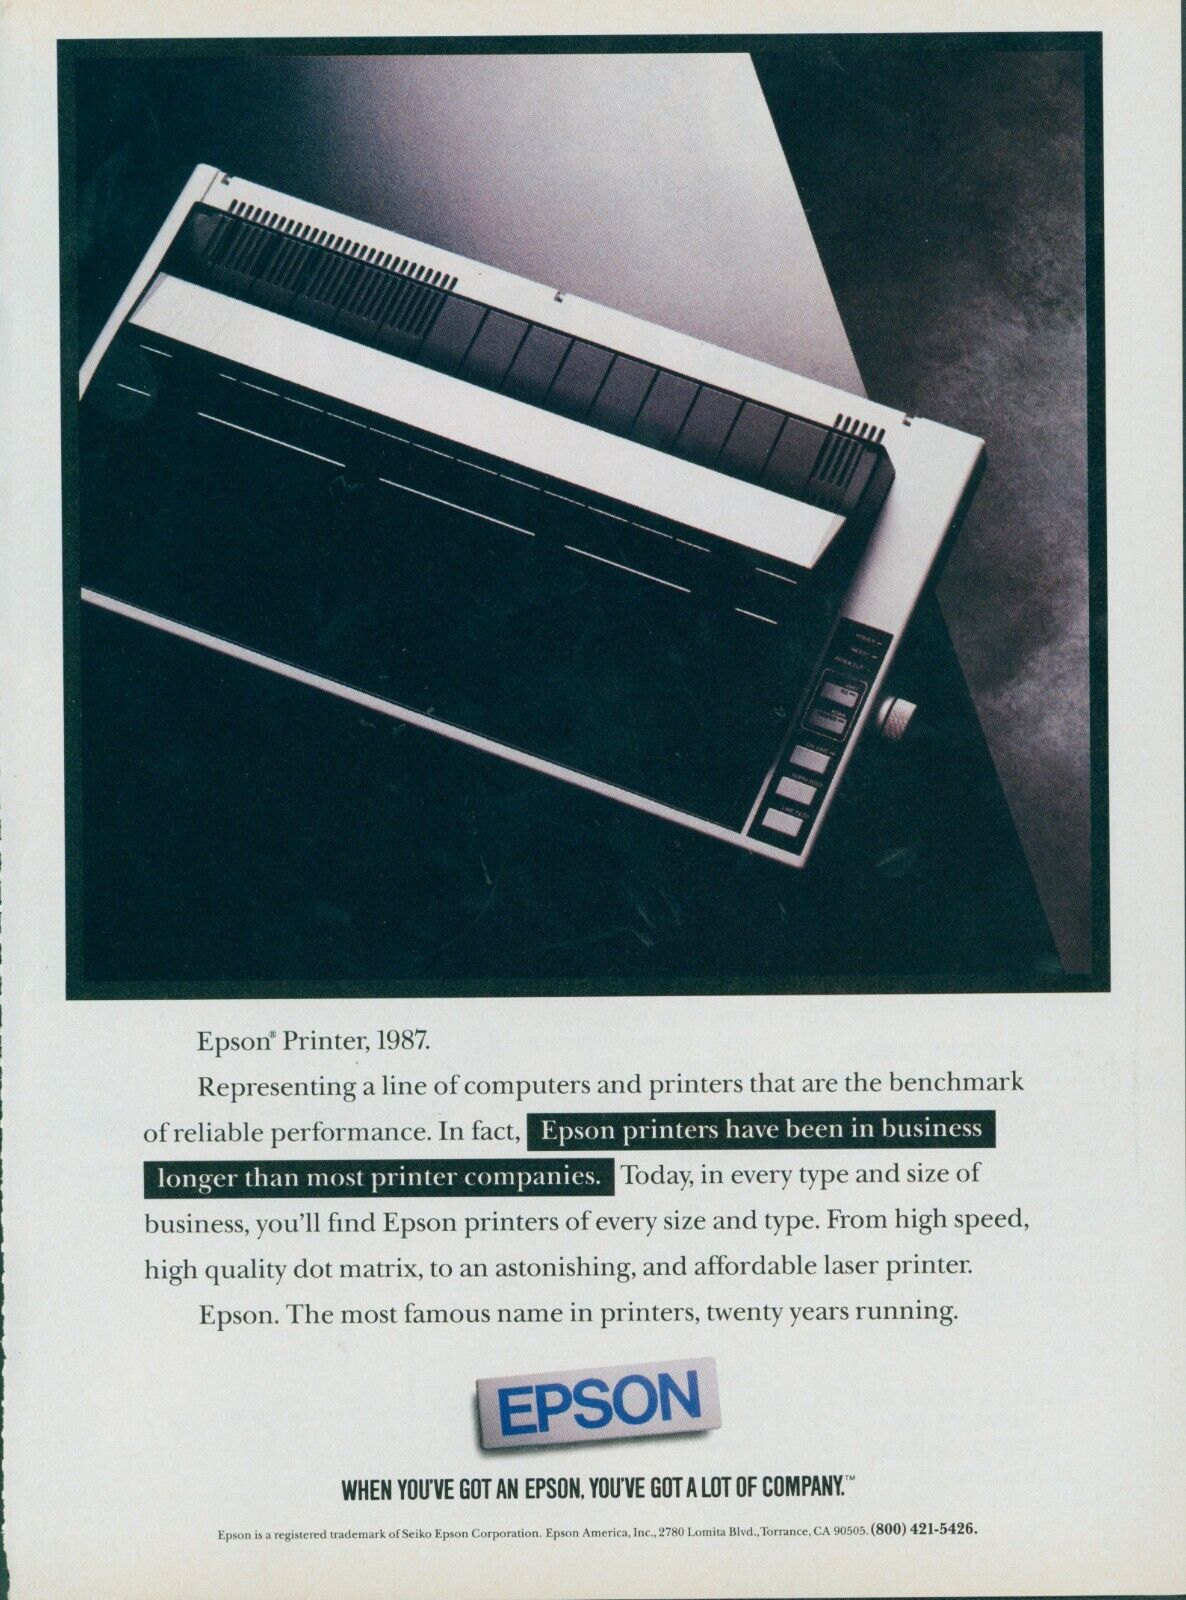 1987 Epson Printers Most Famous Name For 20 Years Dot Matrix Laser Ad PC2